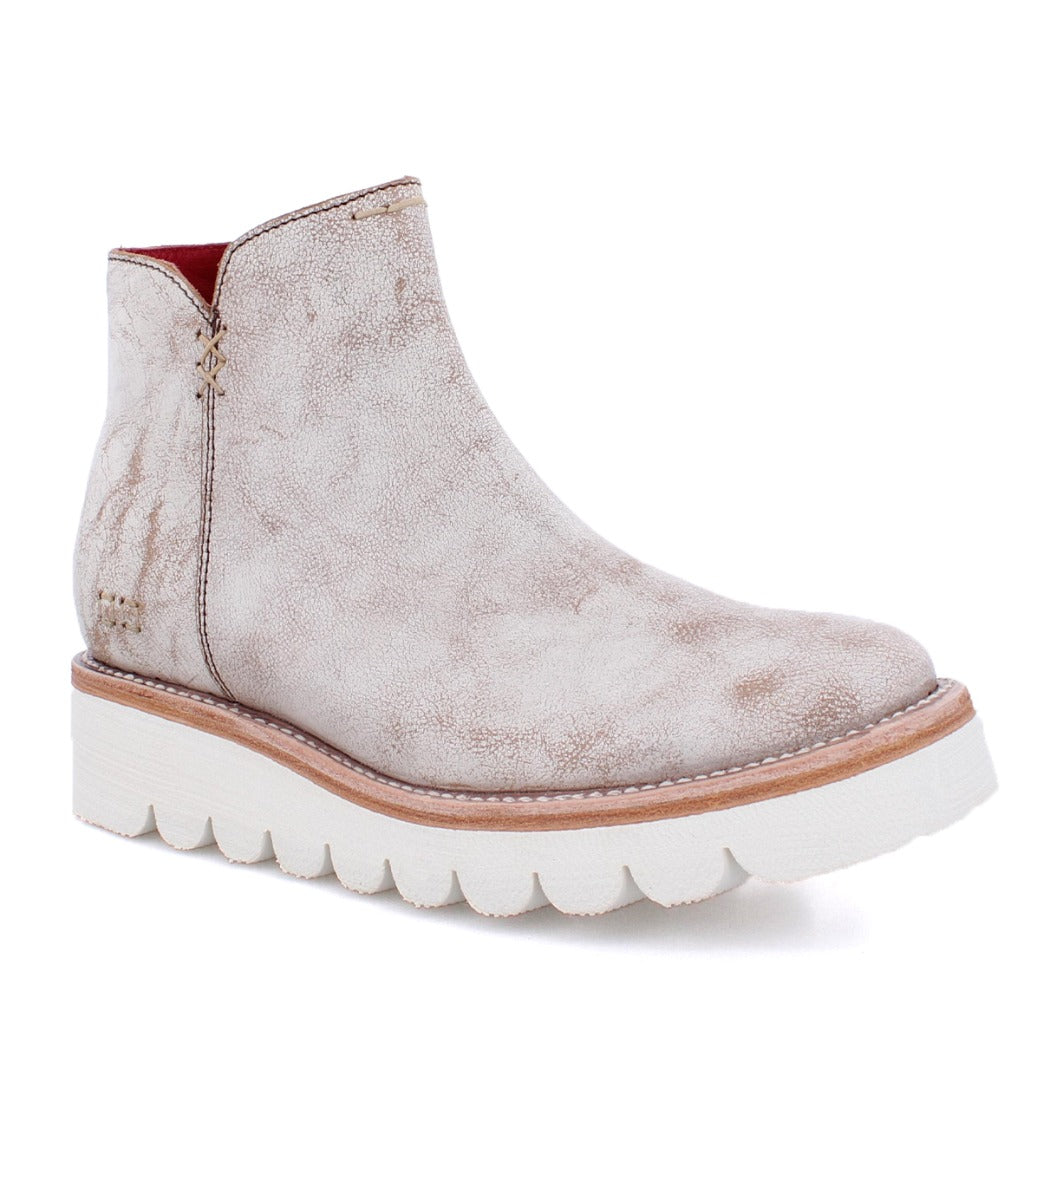 A women's white ankle boot with a white sole, the Lydyi by Bed Stu.